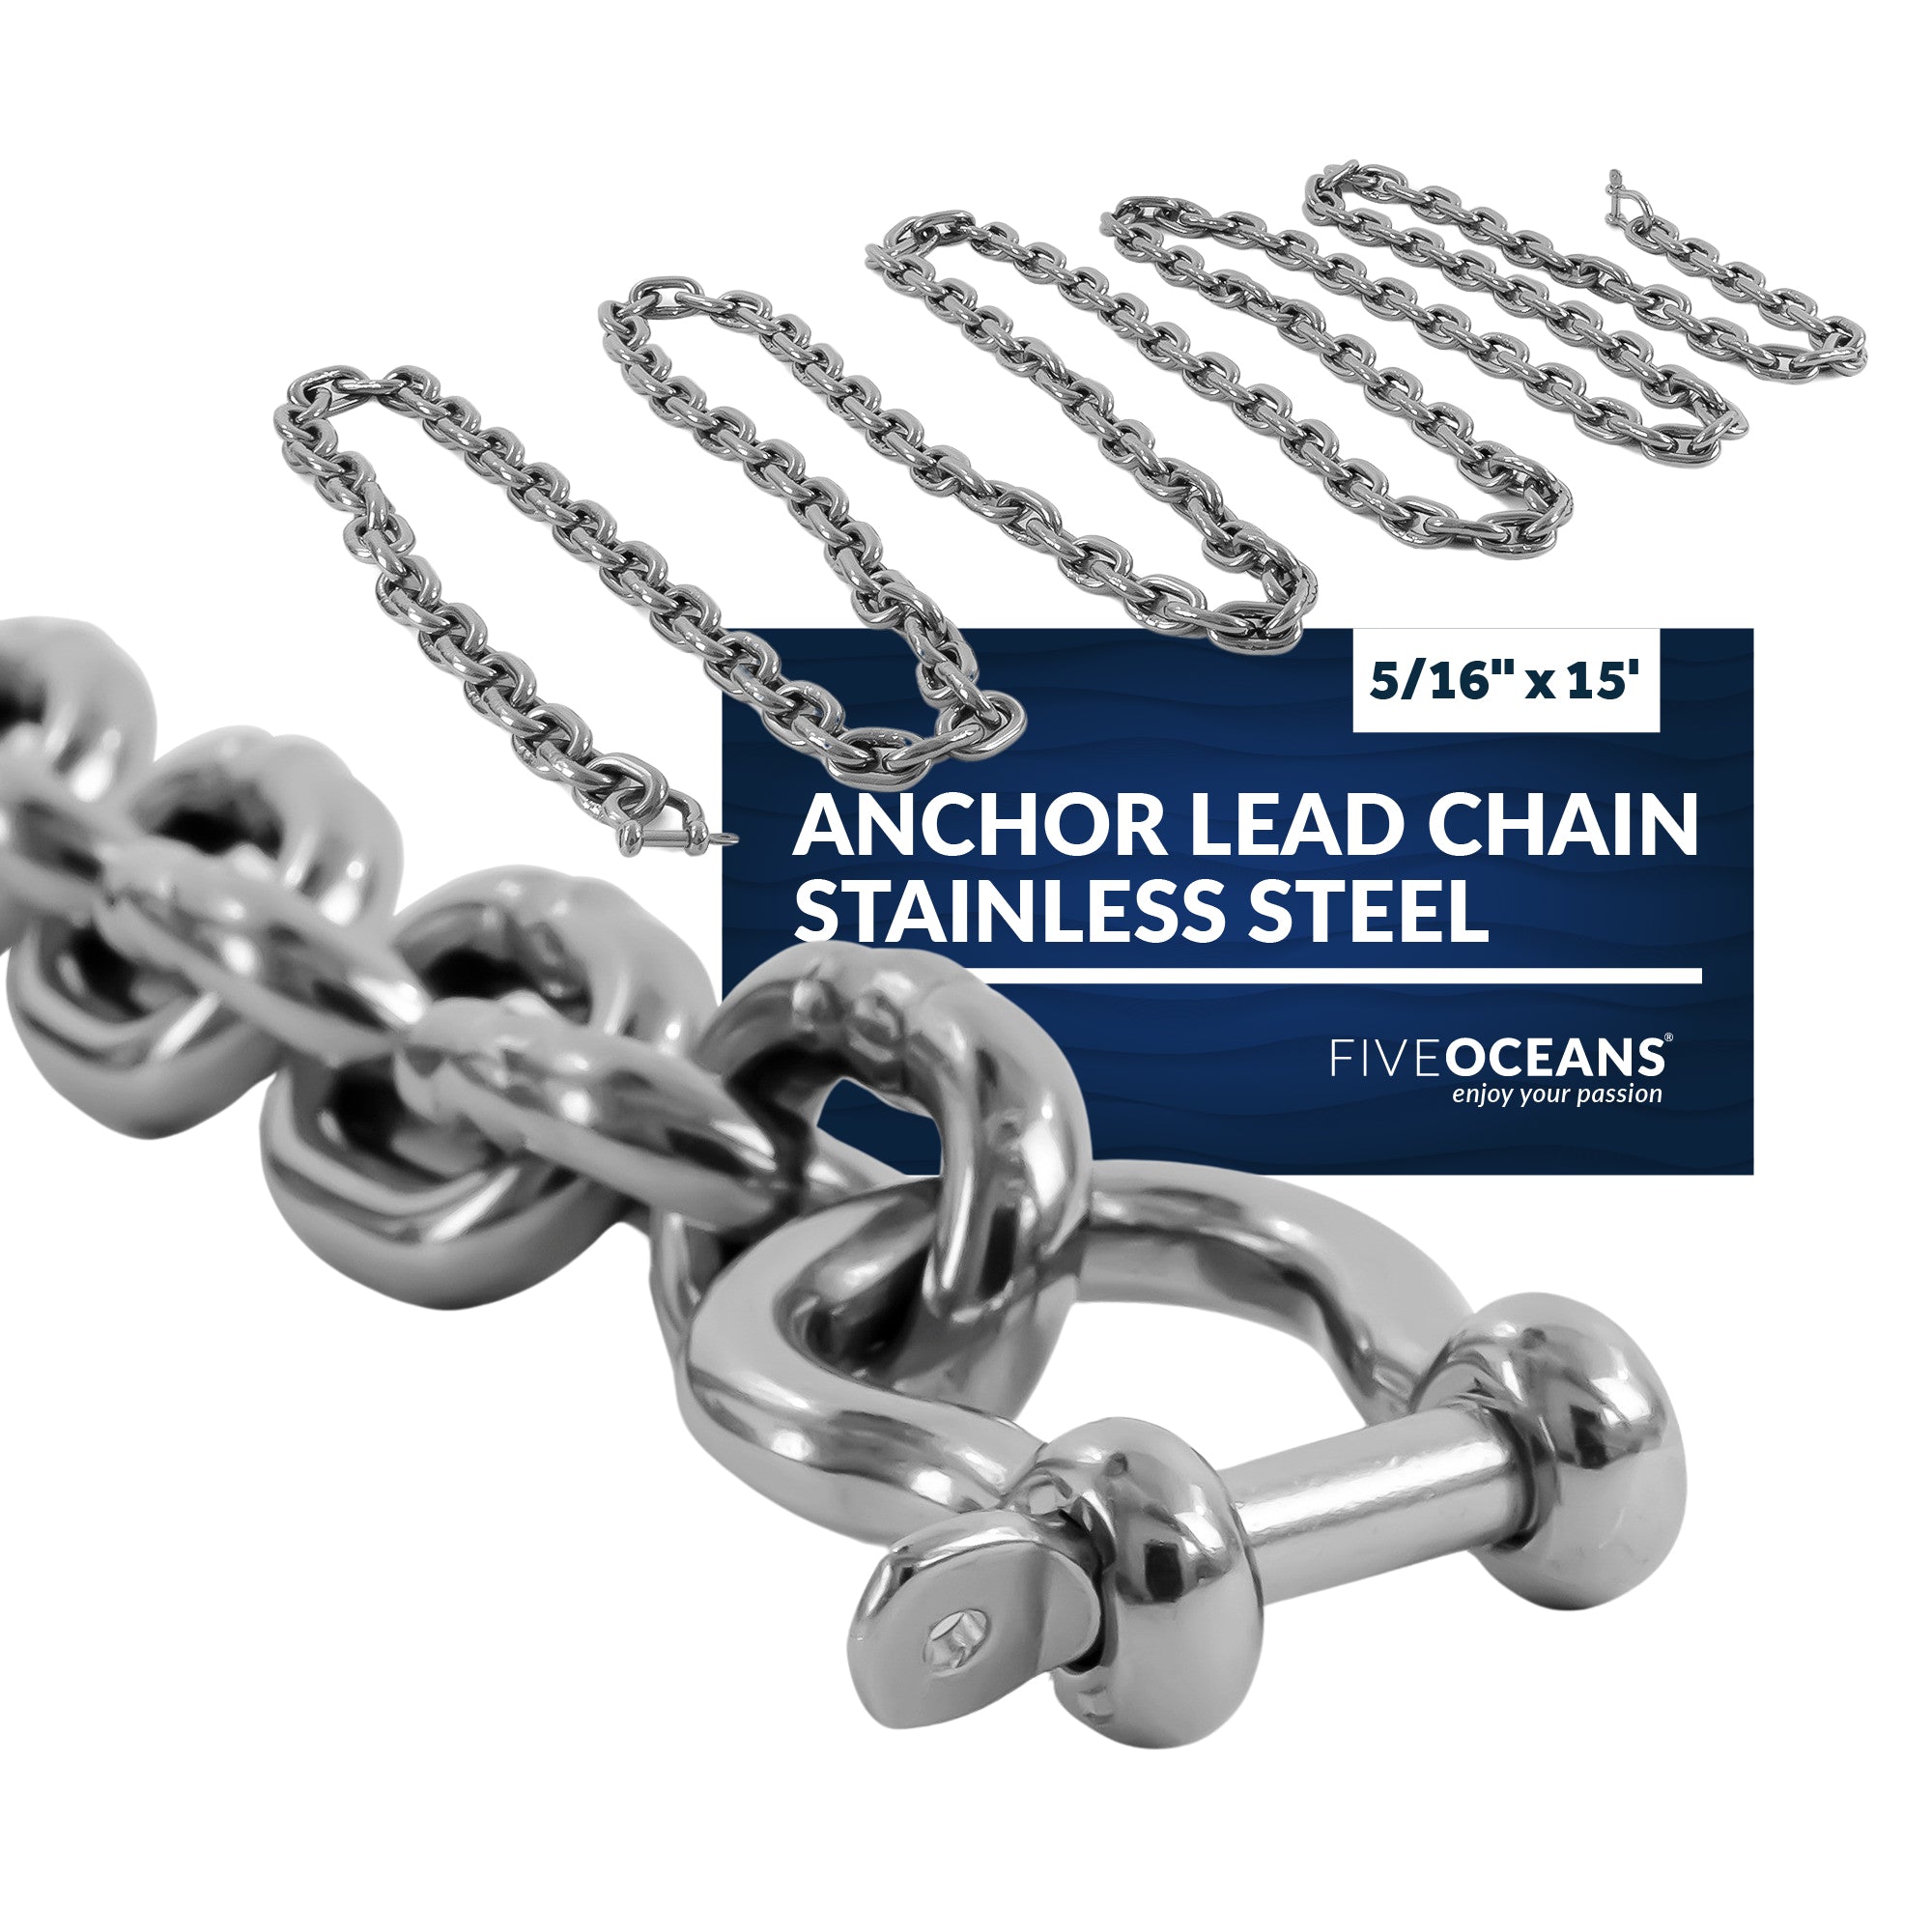 Anchor Lead Chain 5/16" x 15', HTG4 Stainless Steel - FO4493-S15